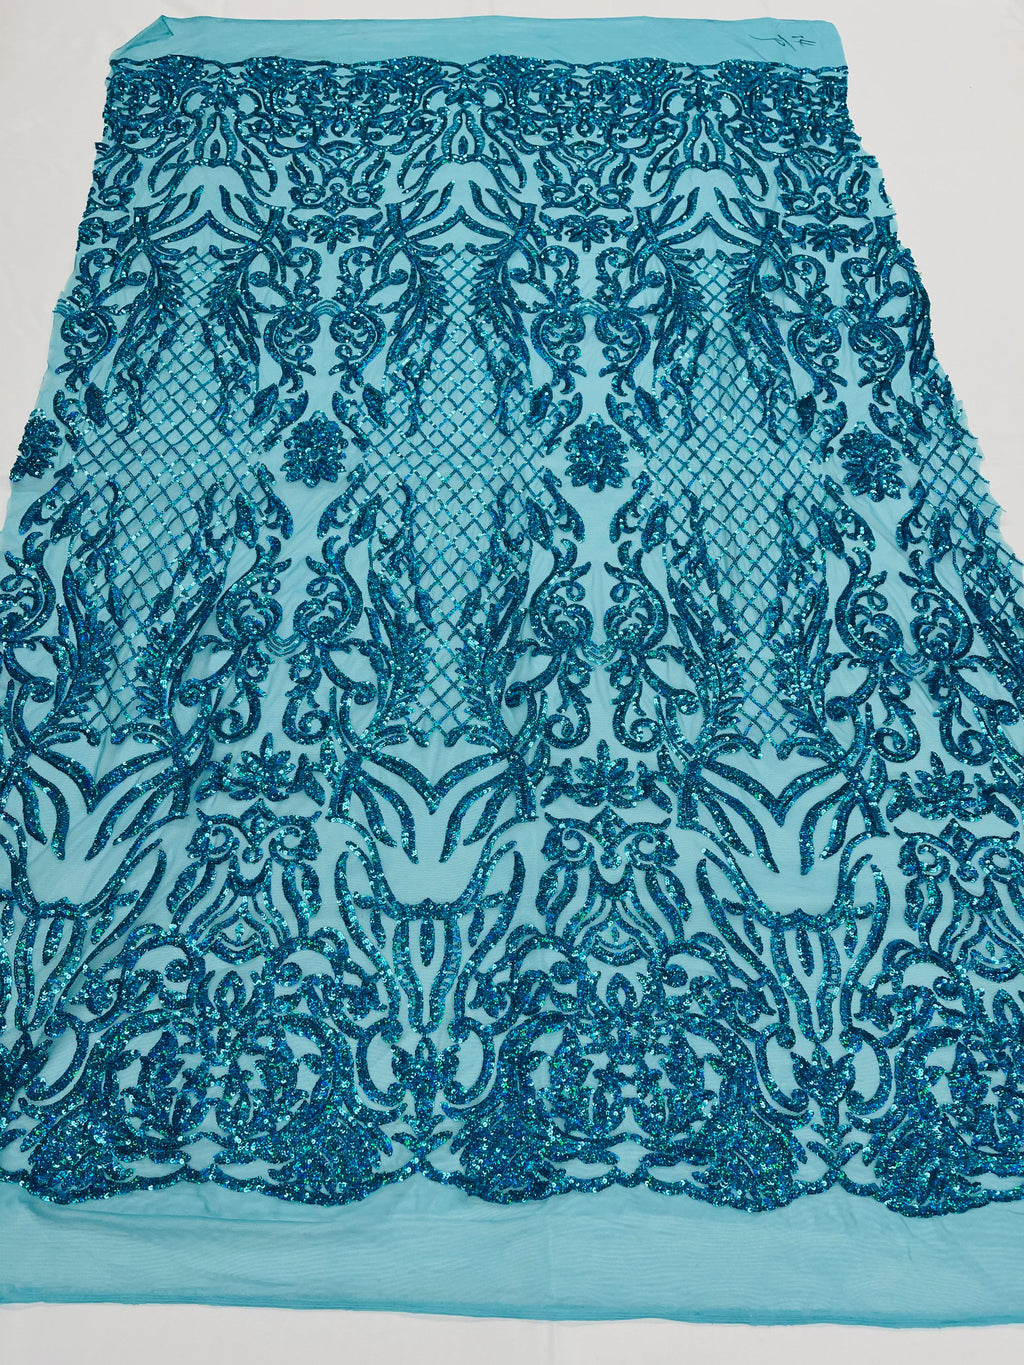 4 Way Stretch Fabric Design - Holographic Turquoise - Fancy Net Sequin